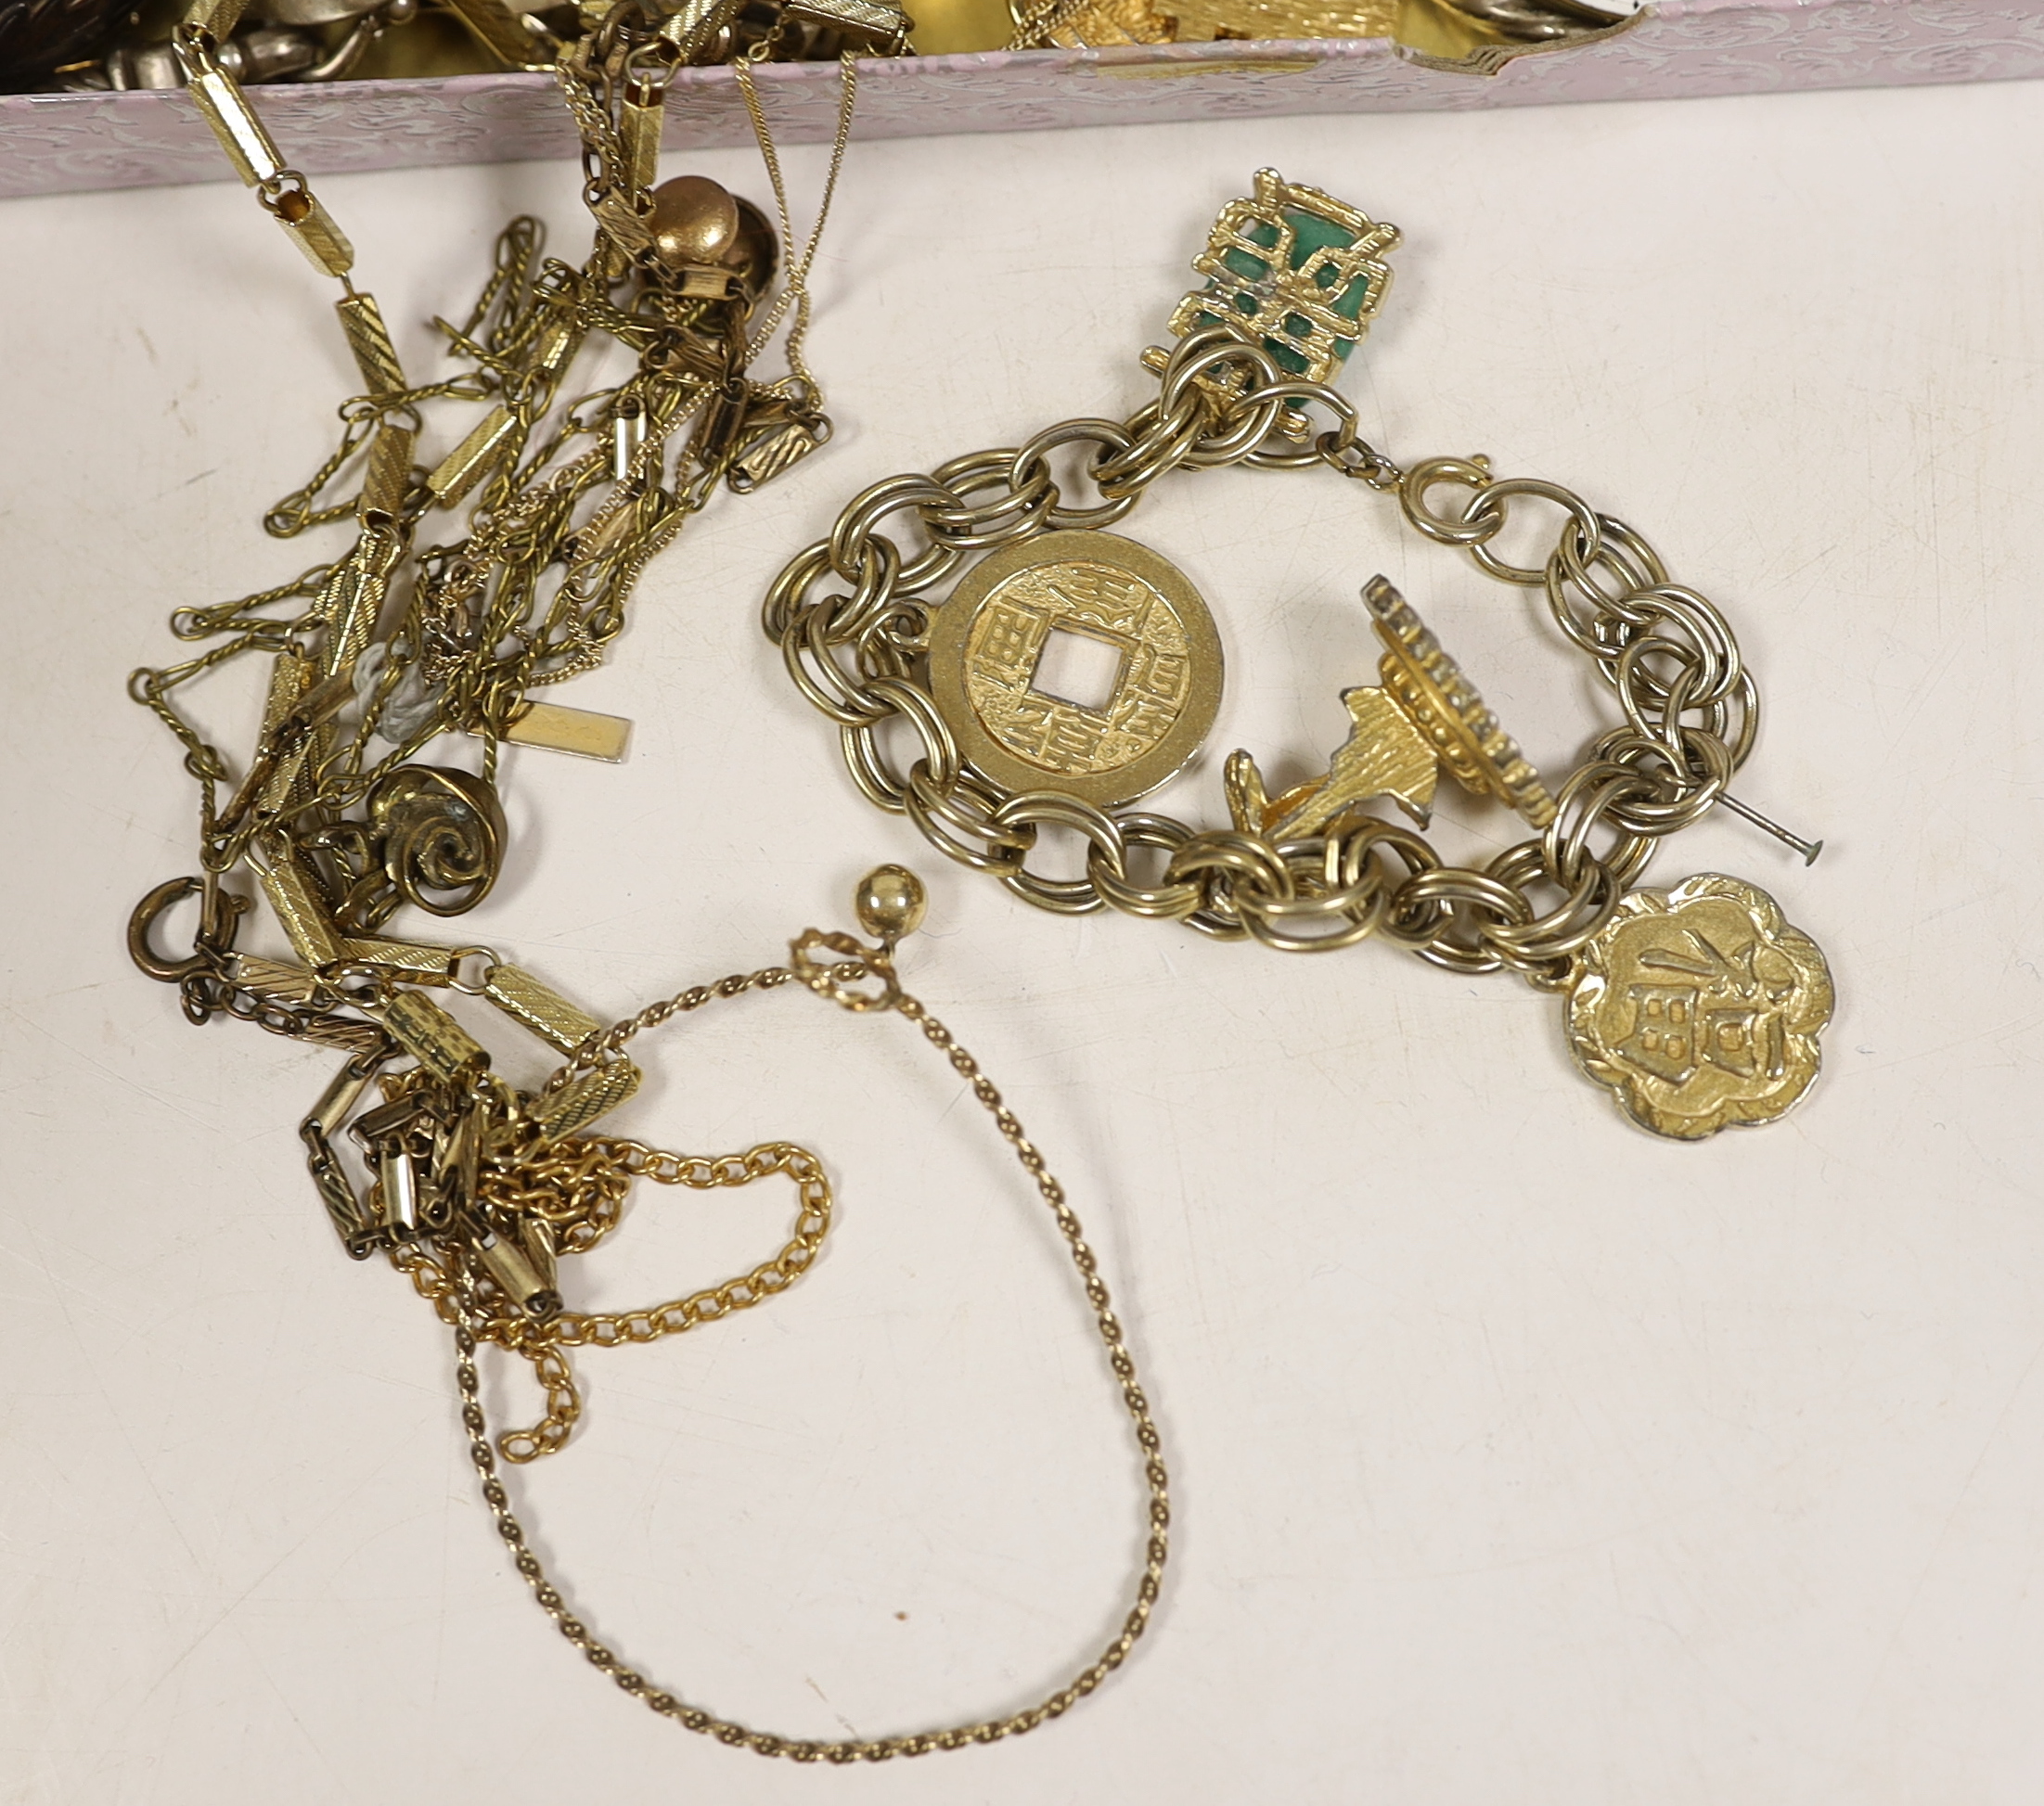 A quantity of assorted mainly costume jewellery and other items including a silver hinged bangle, pair of 925 drop earrings, 925 bracelet, pocket watch movements, etc.